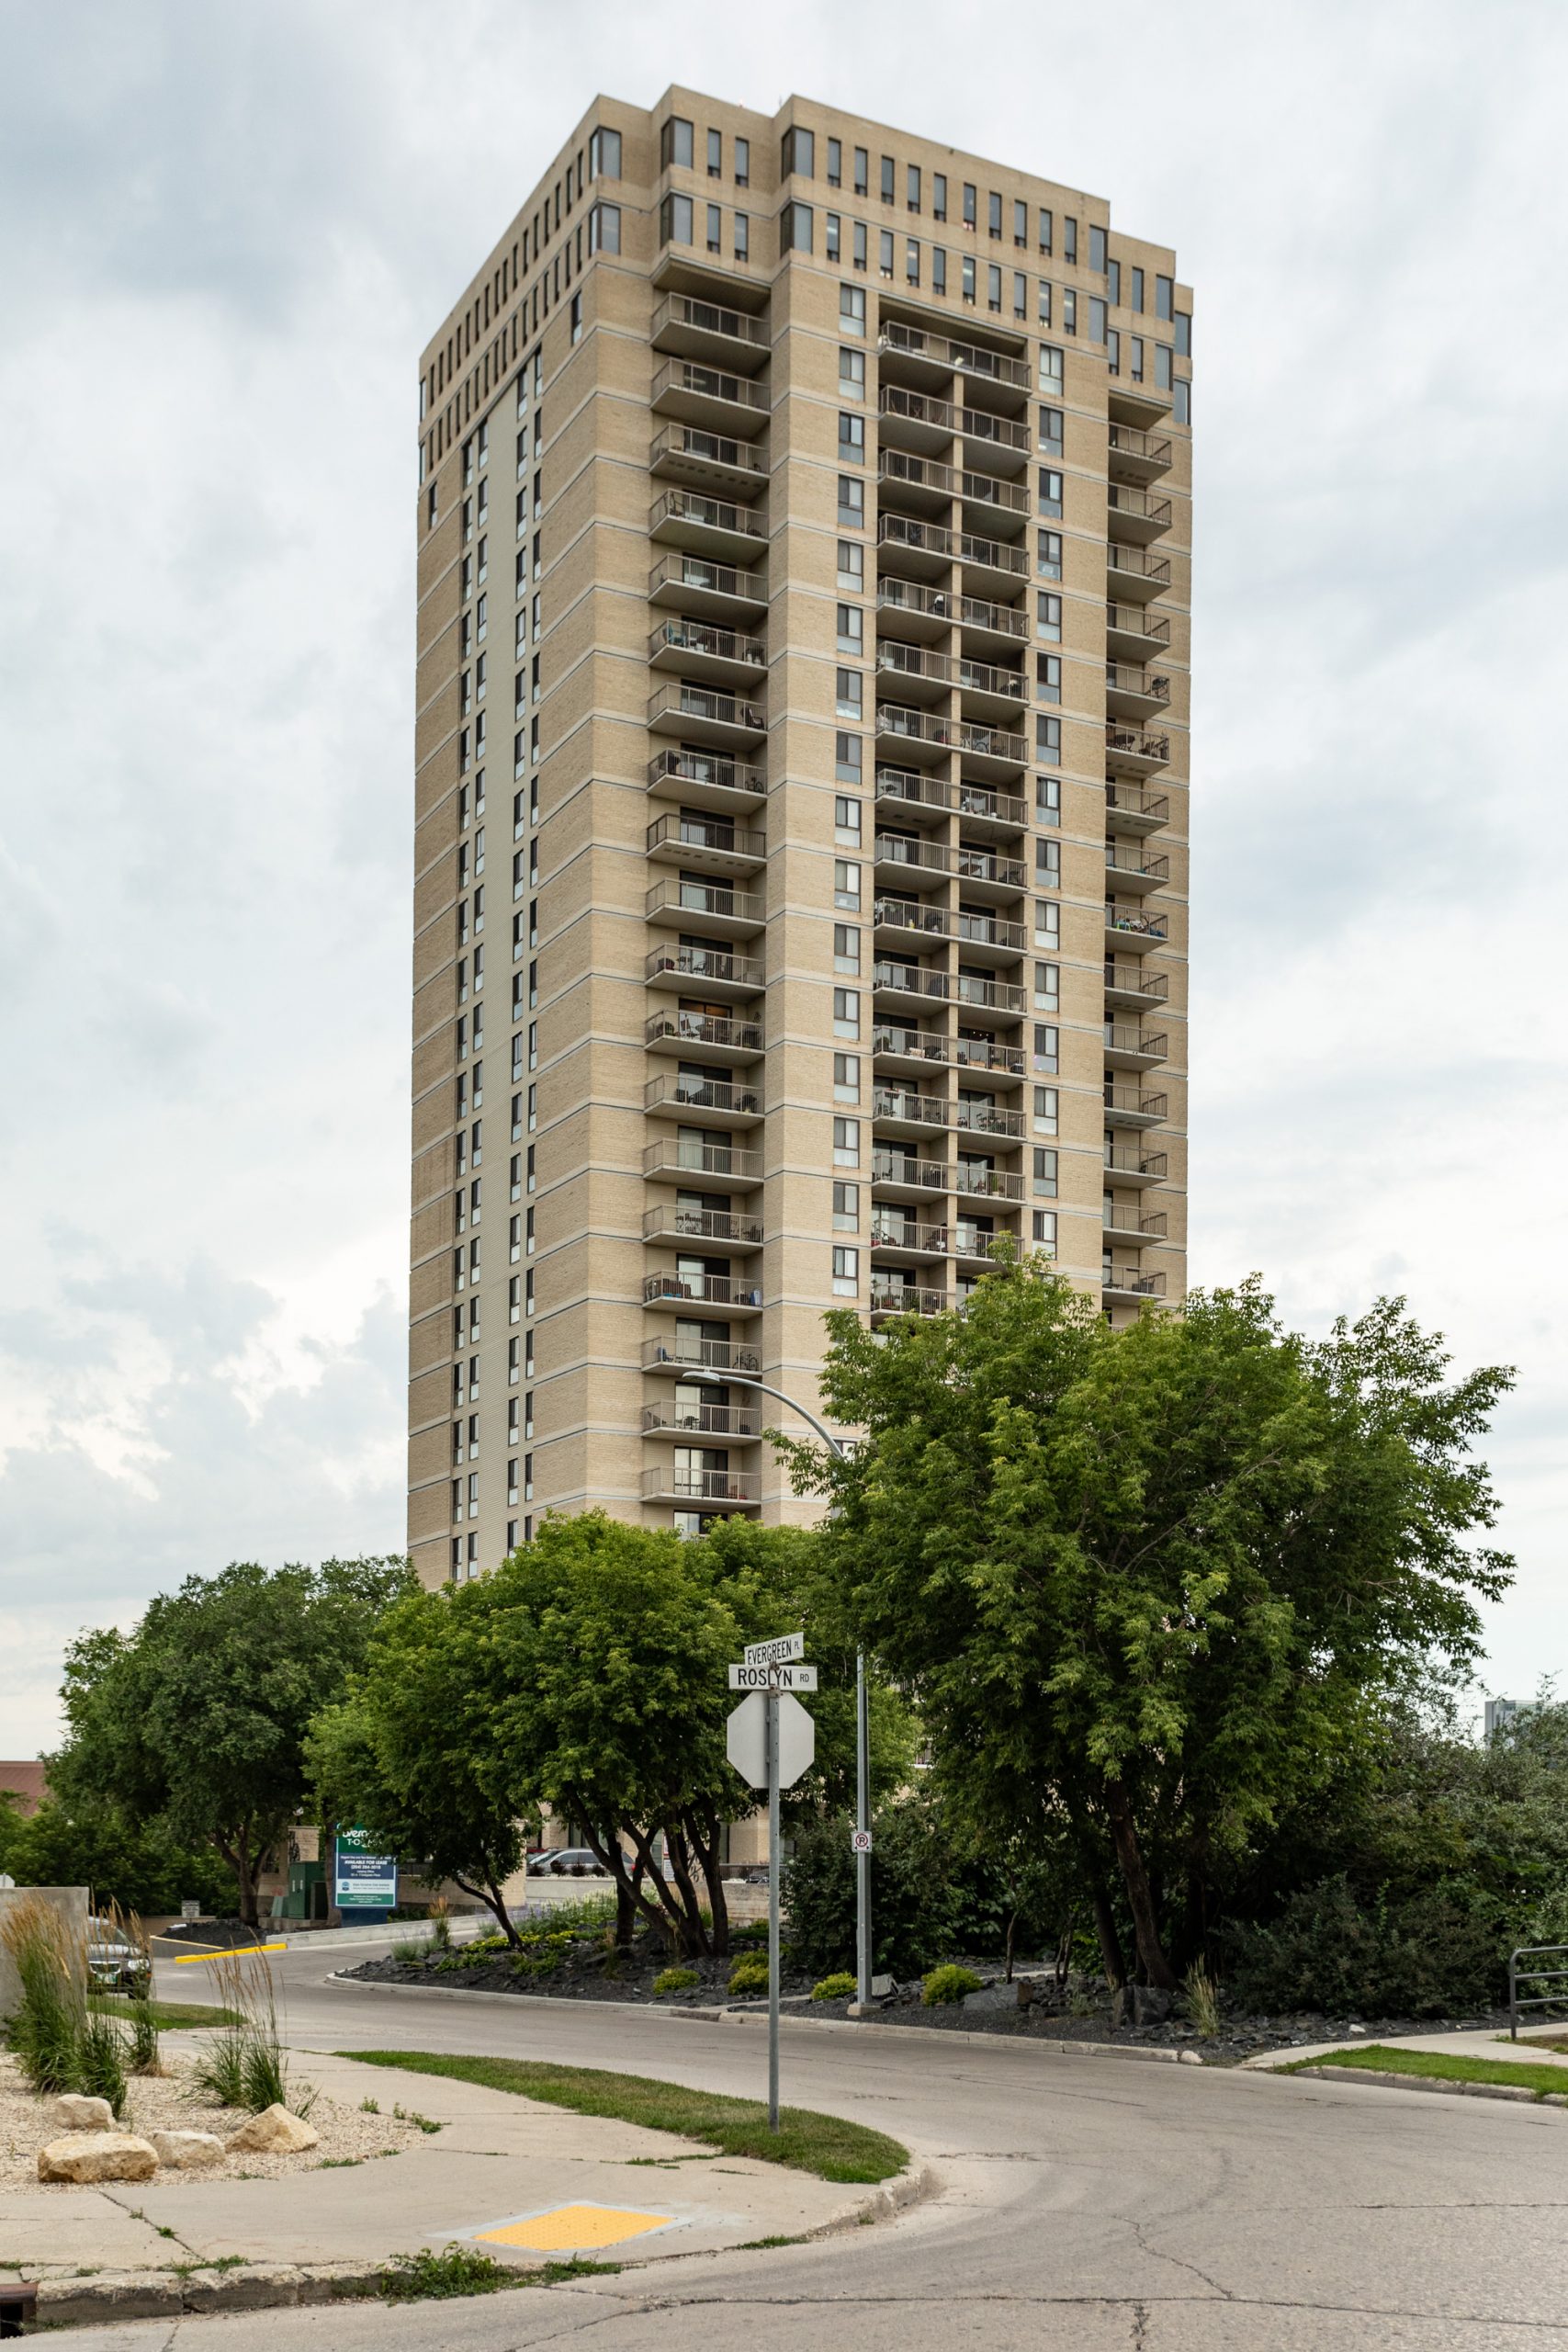 Image of 7 Evergreen Place